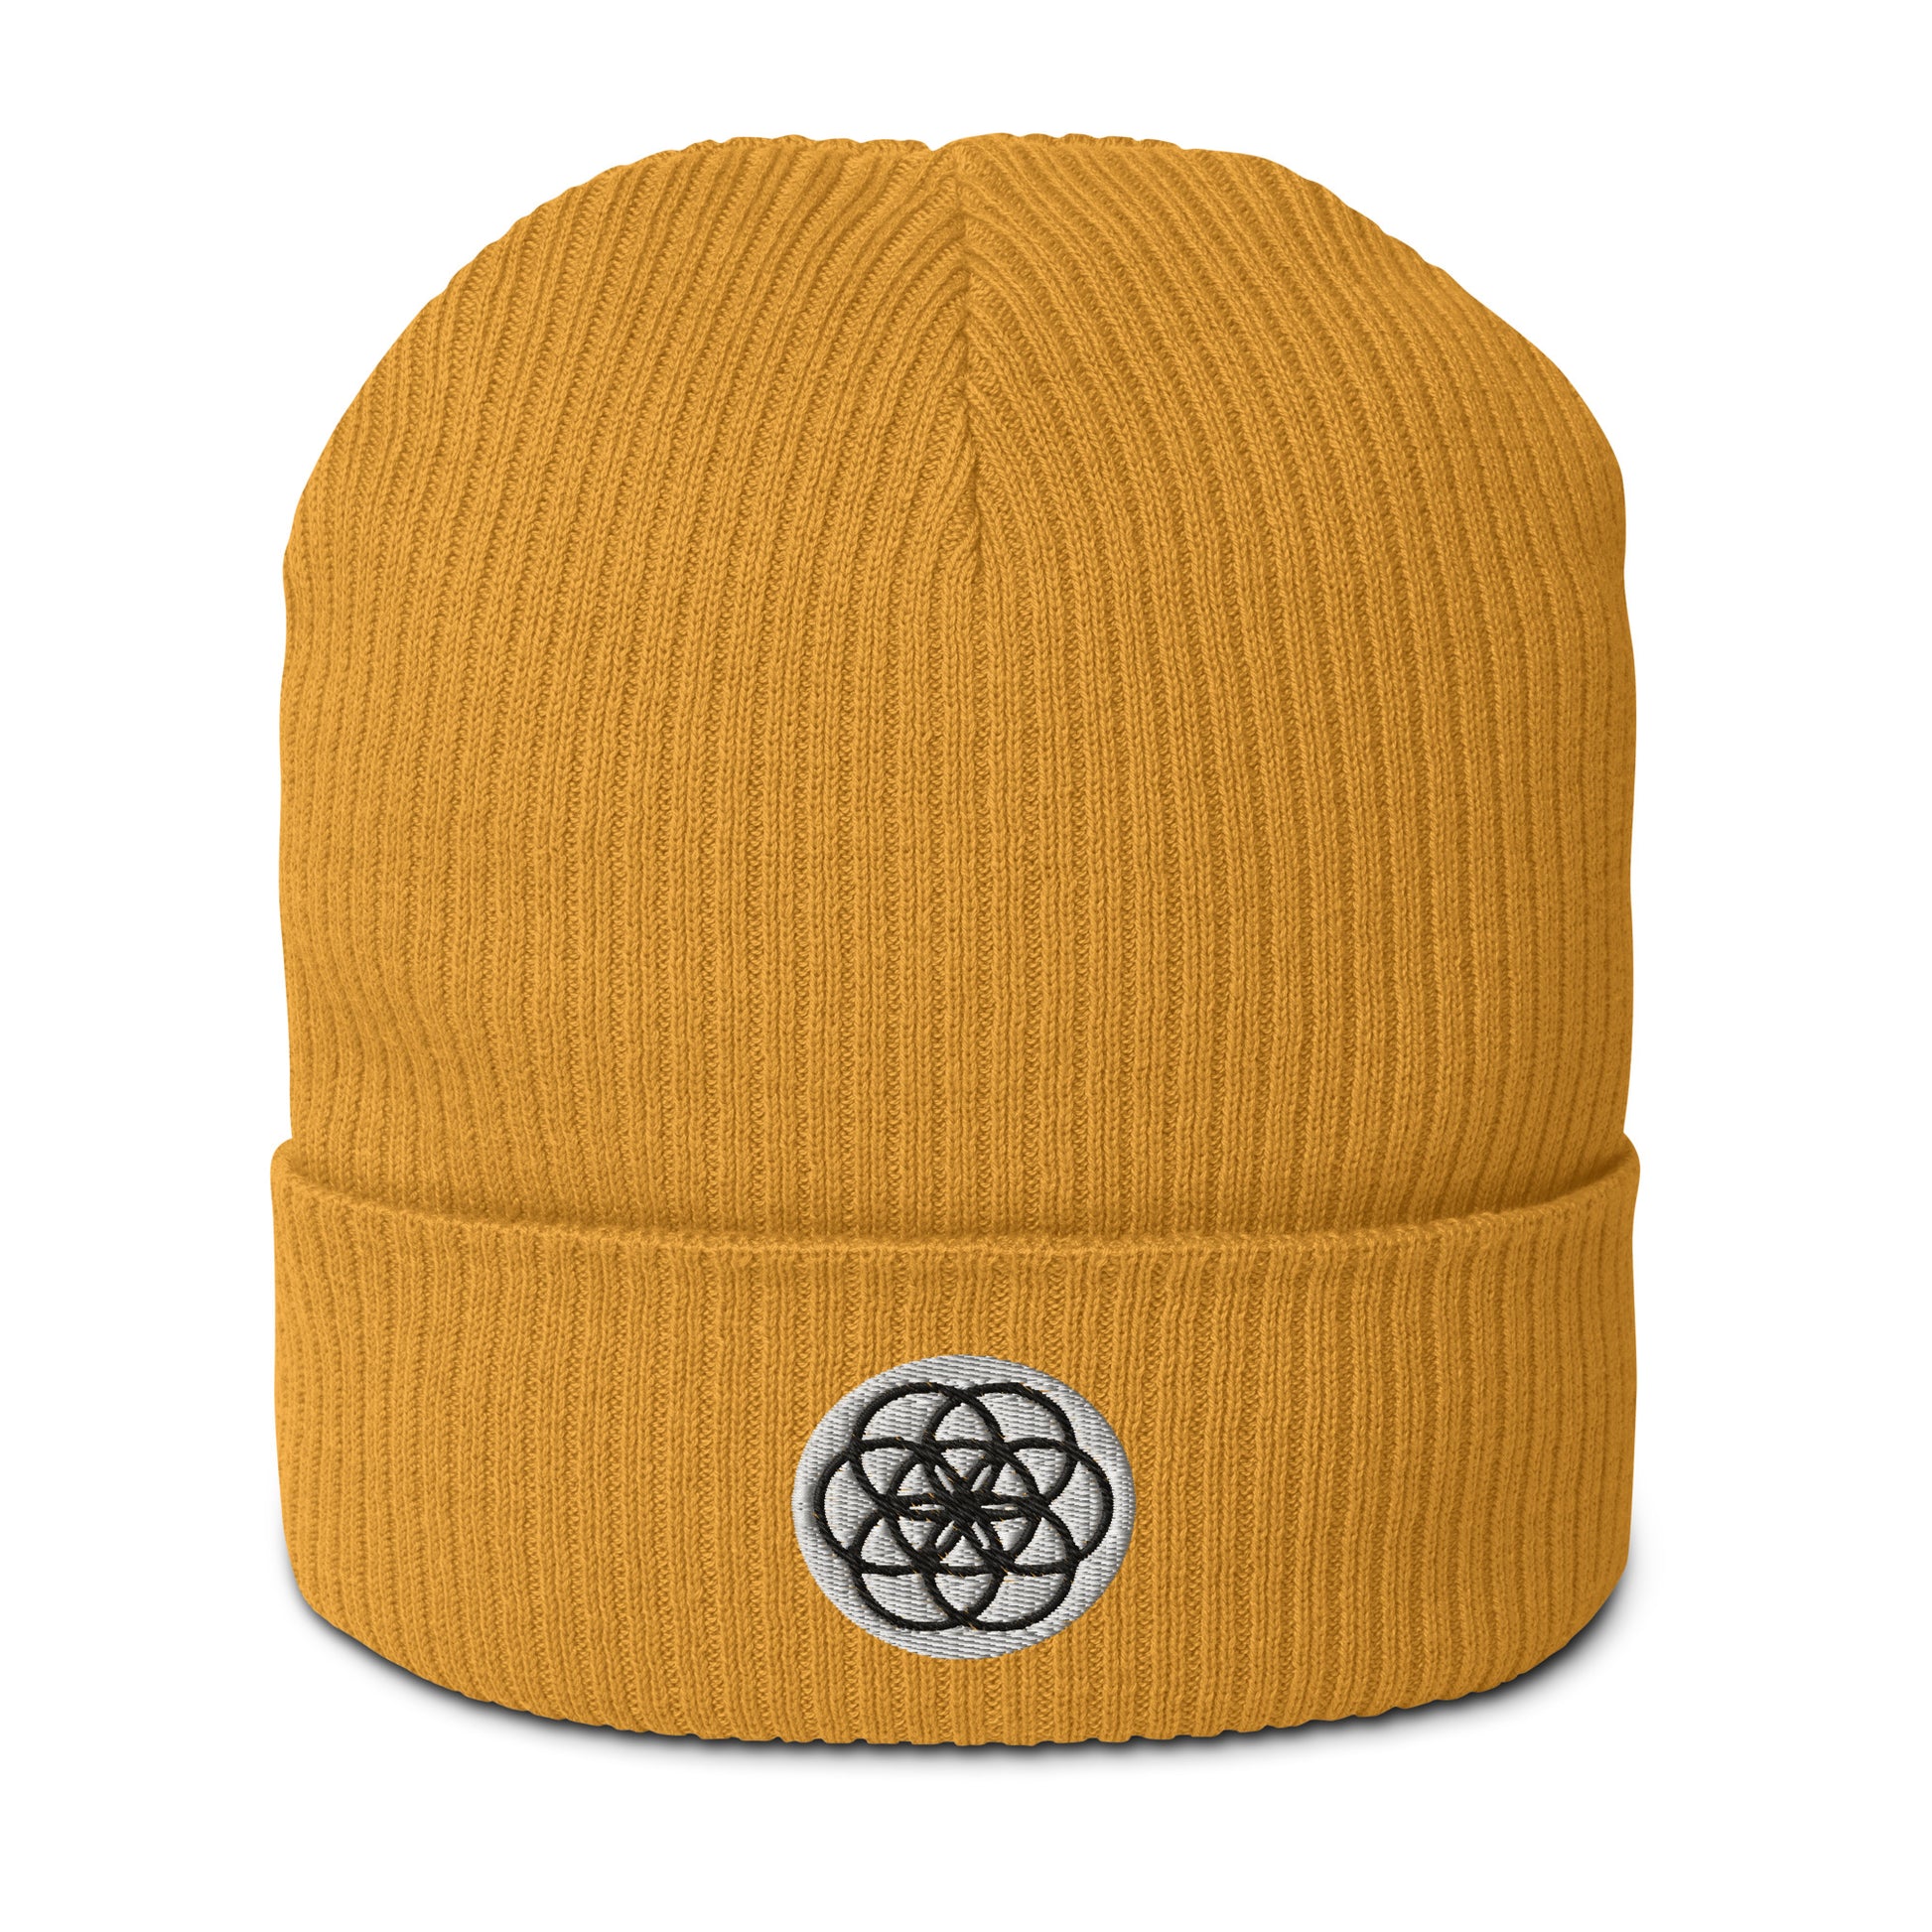 The Seed of Life beanie in Mustard Yellow is made from 100% organic cotton and it’s the perfect cozy addition to your energetically elevated wardrobe. The seed of life is an ancient and meaningful sacred geometry symbol that Whether you're stargazing or navigating the urban jungle, let this beanie remind you of your place in the cosmic tapestry.